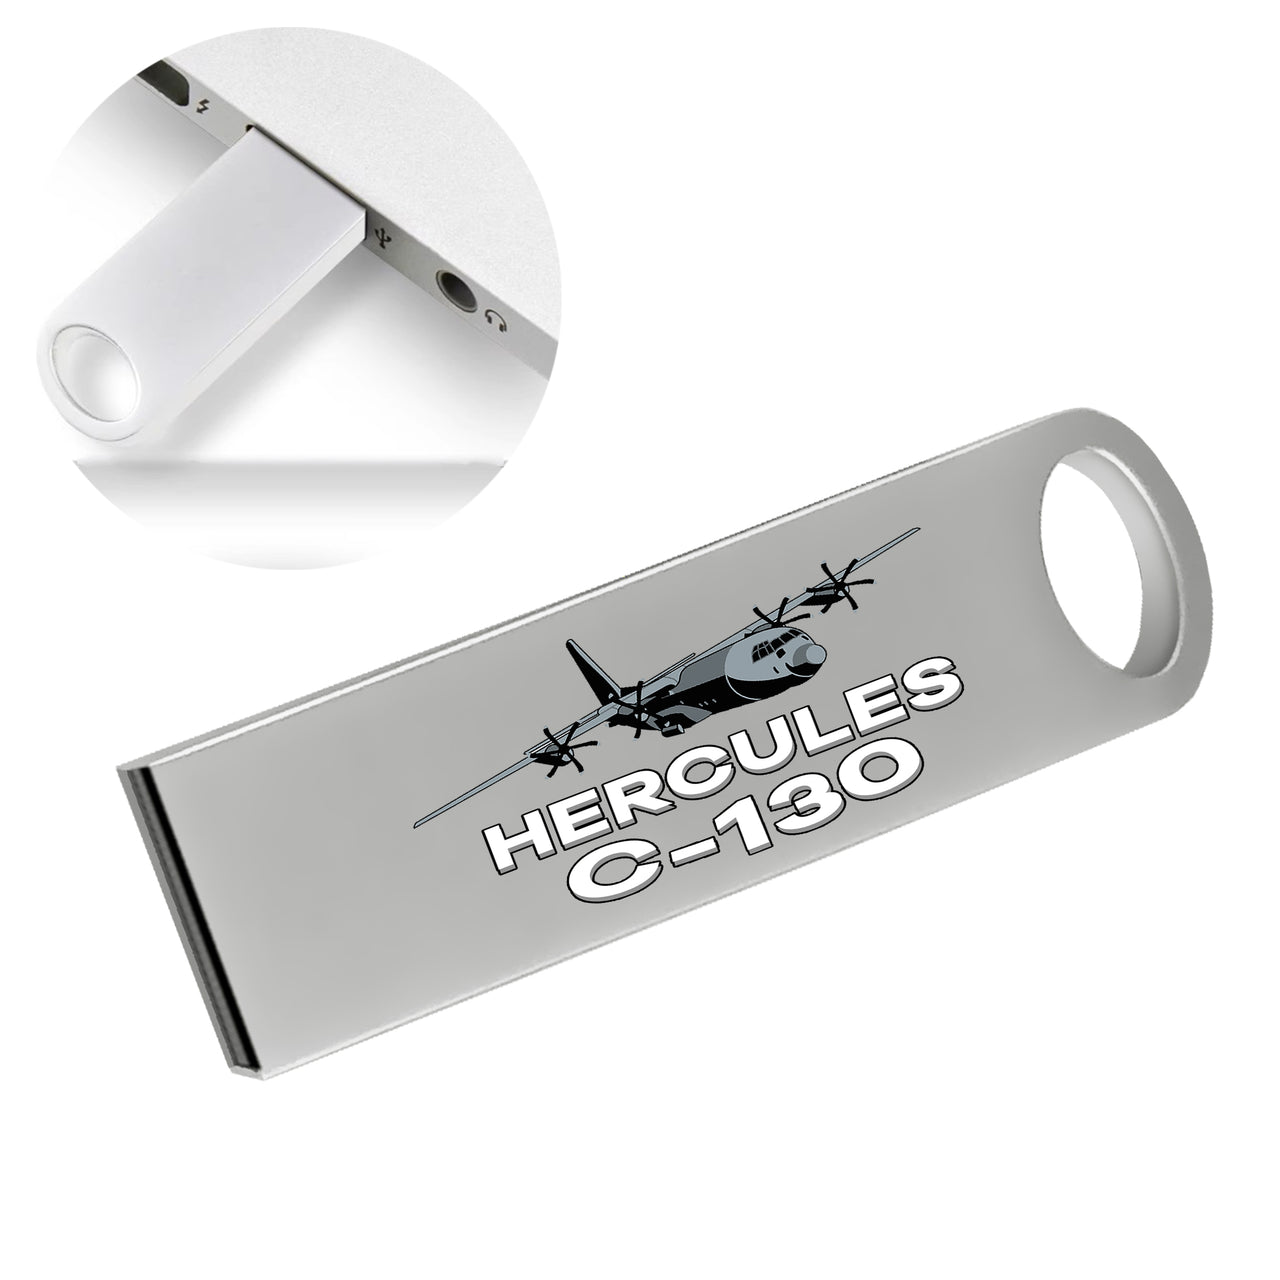 The Hercules C130 Designed Waterproof USB Devices